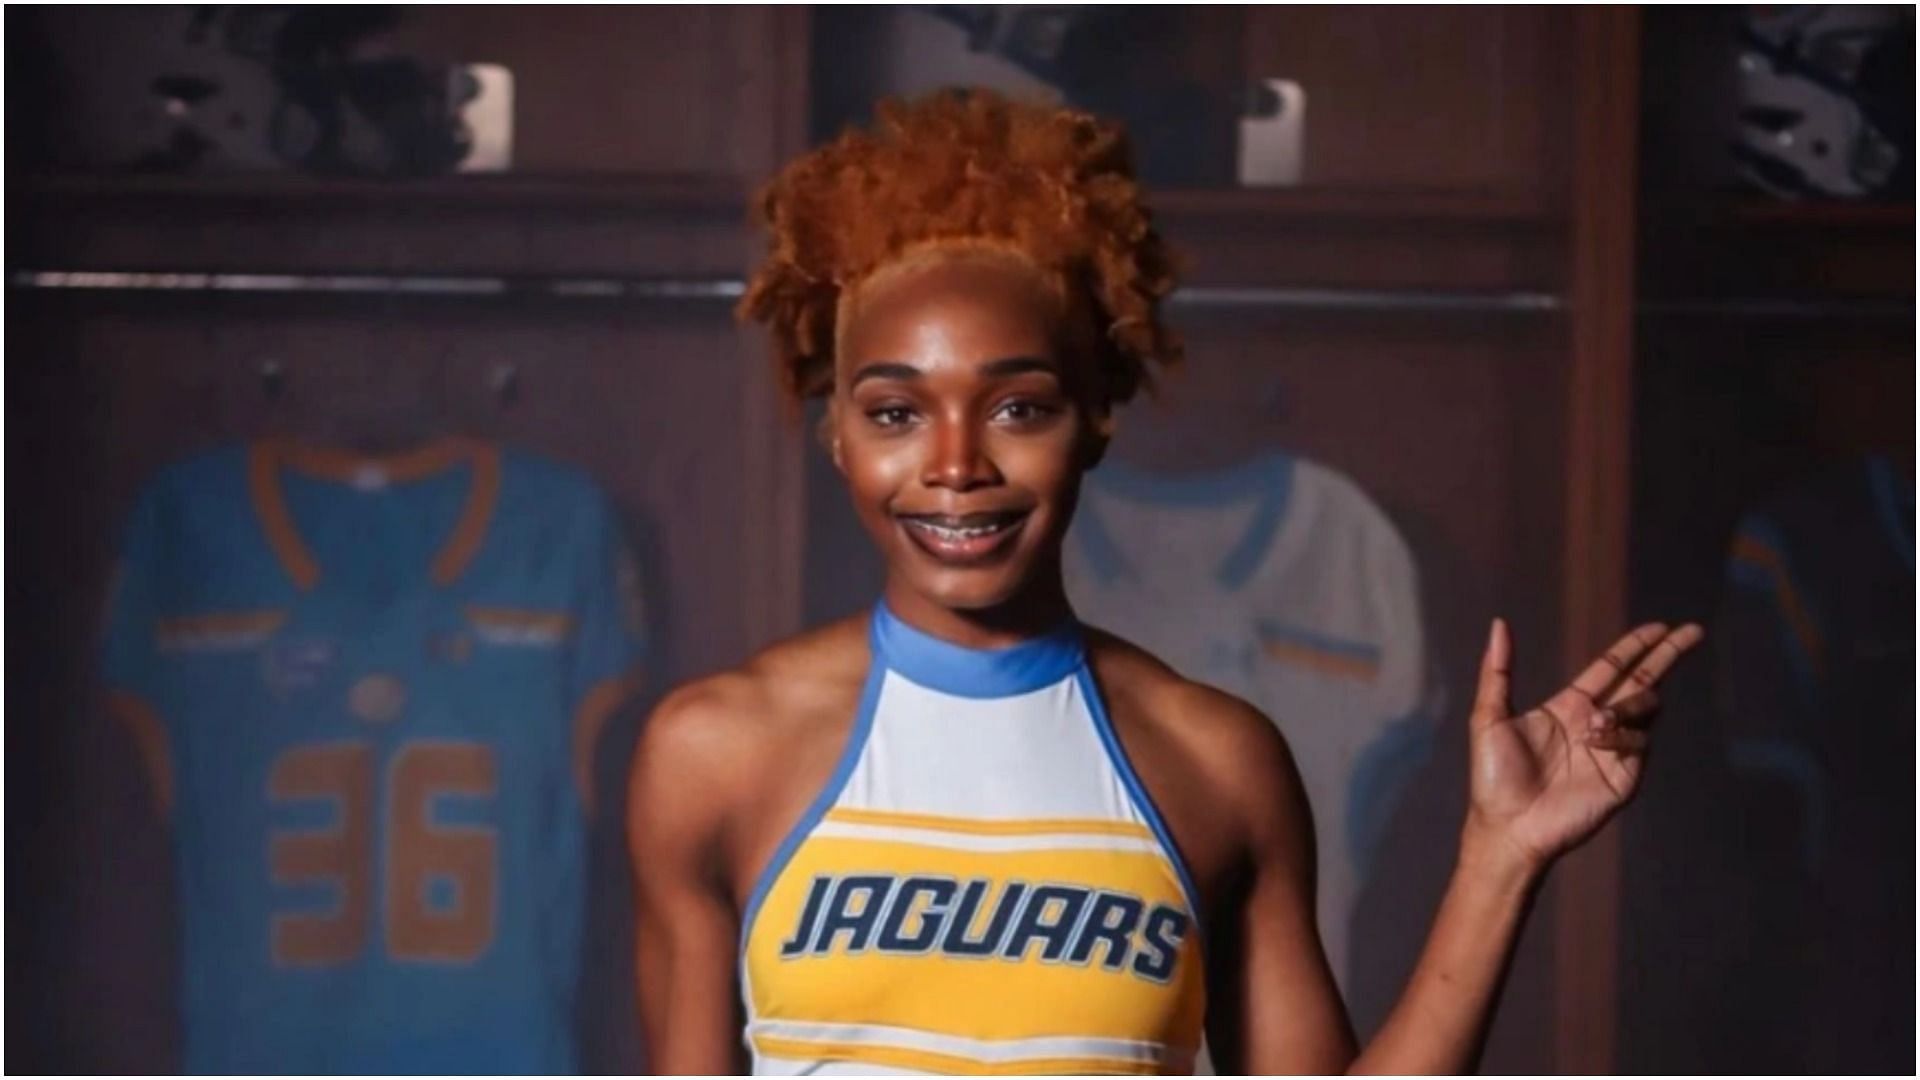 Tributes have been pouring in since Southern University cheerleader Arlana Miller&#039;s death by suicide spread online (Image via SouthernU_BR/ Twitter)